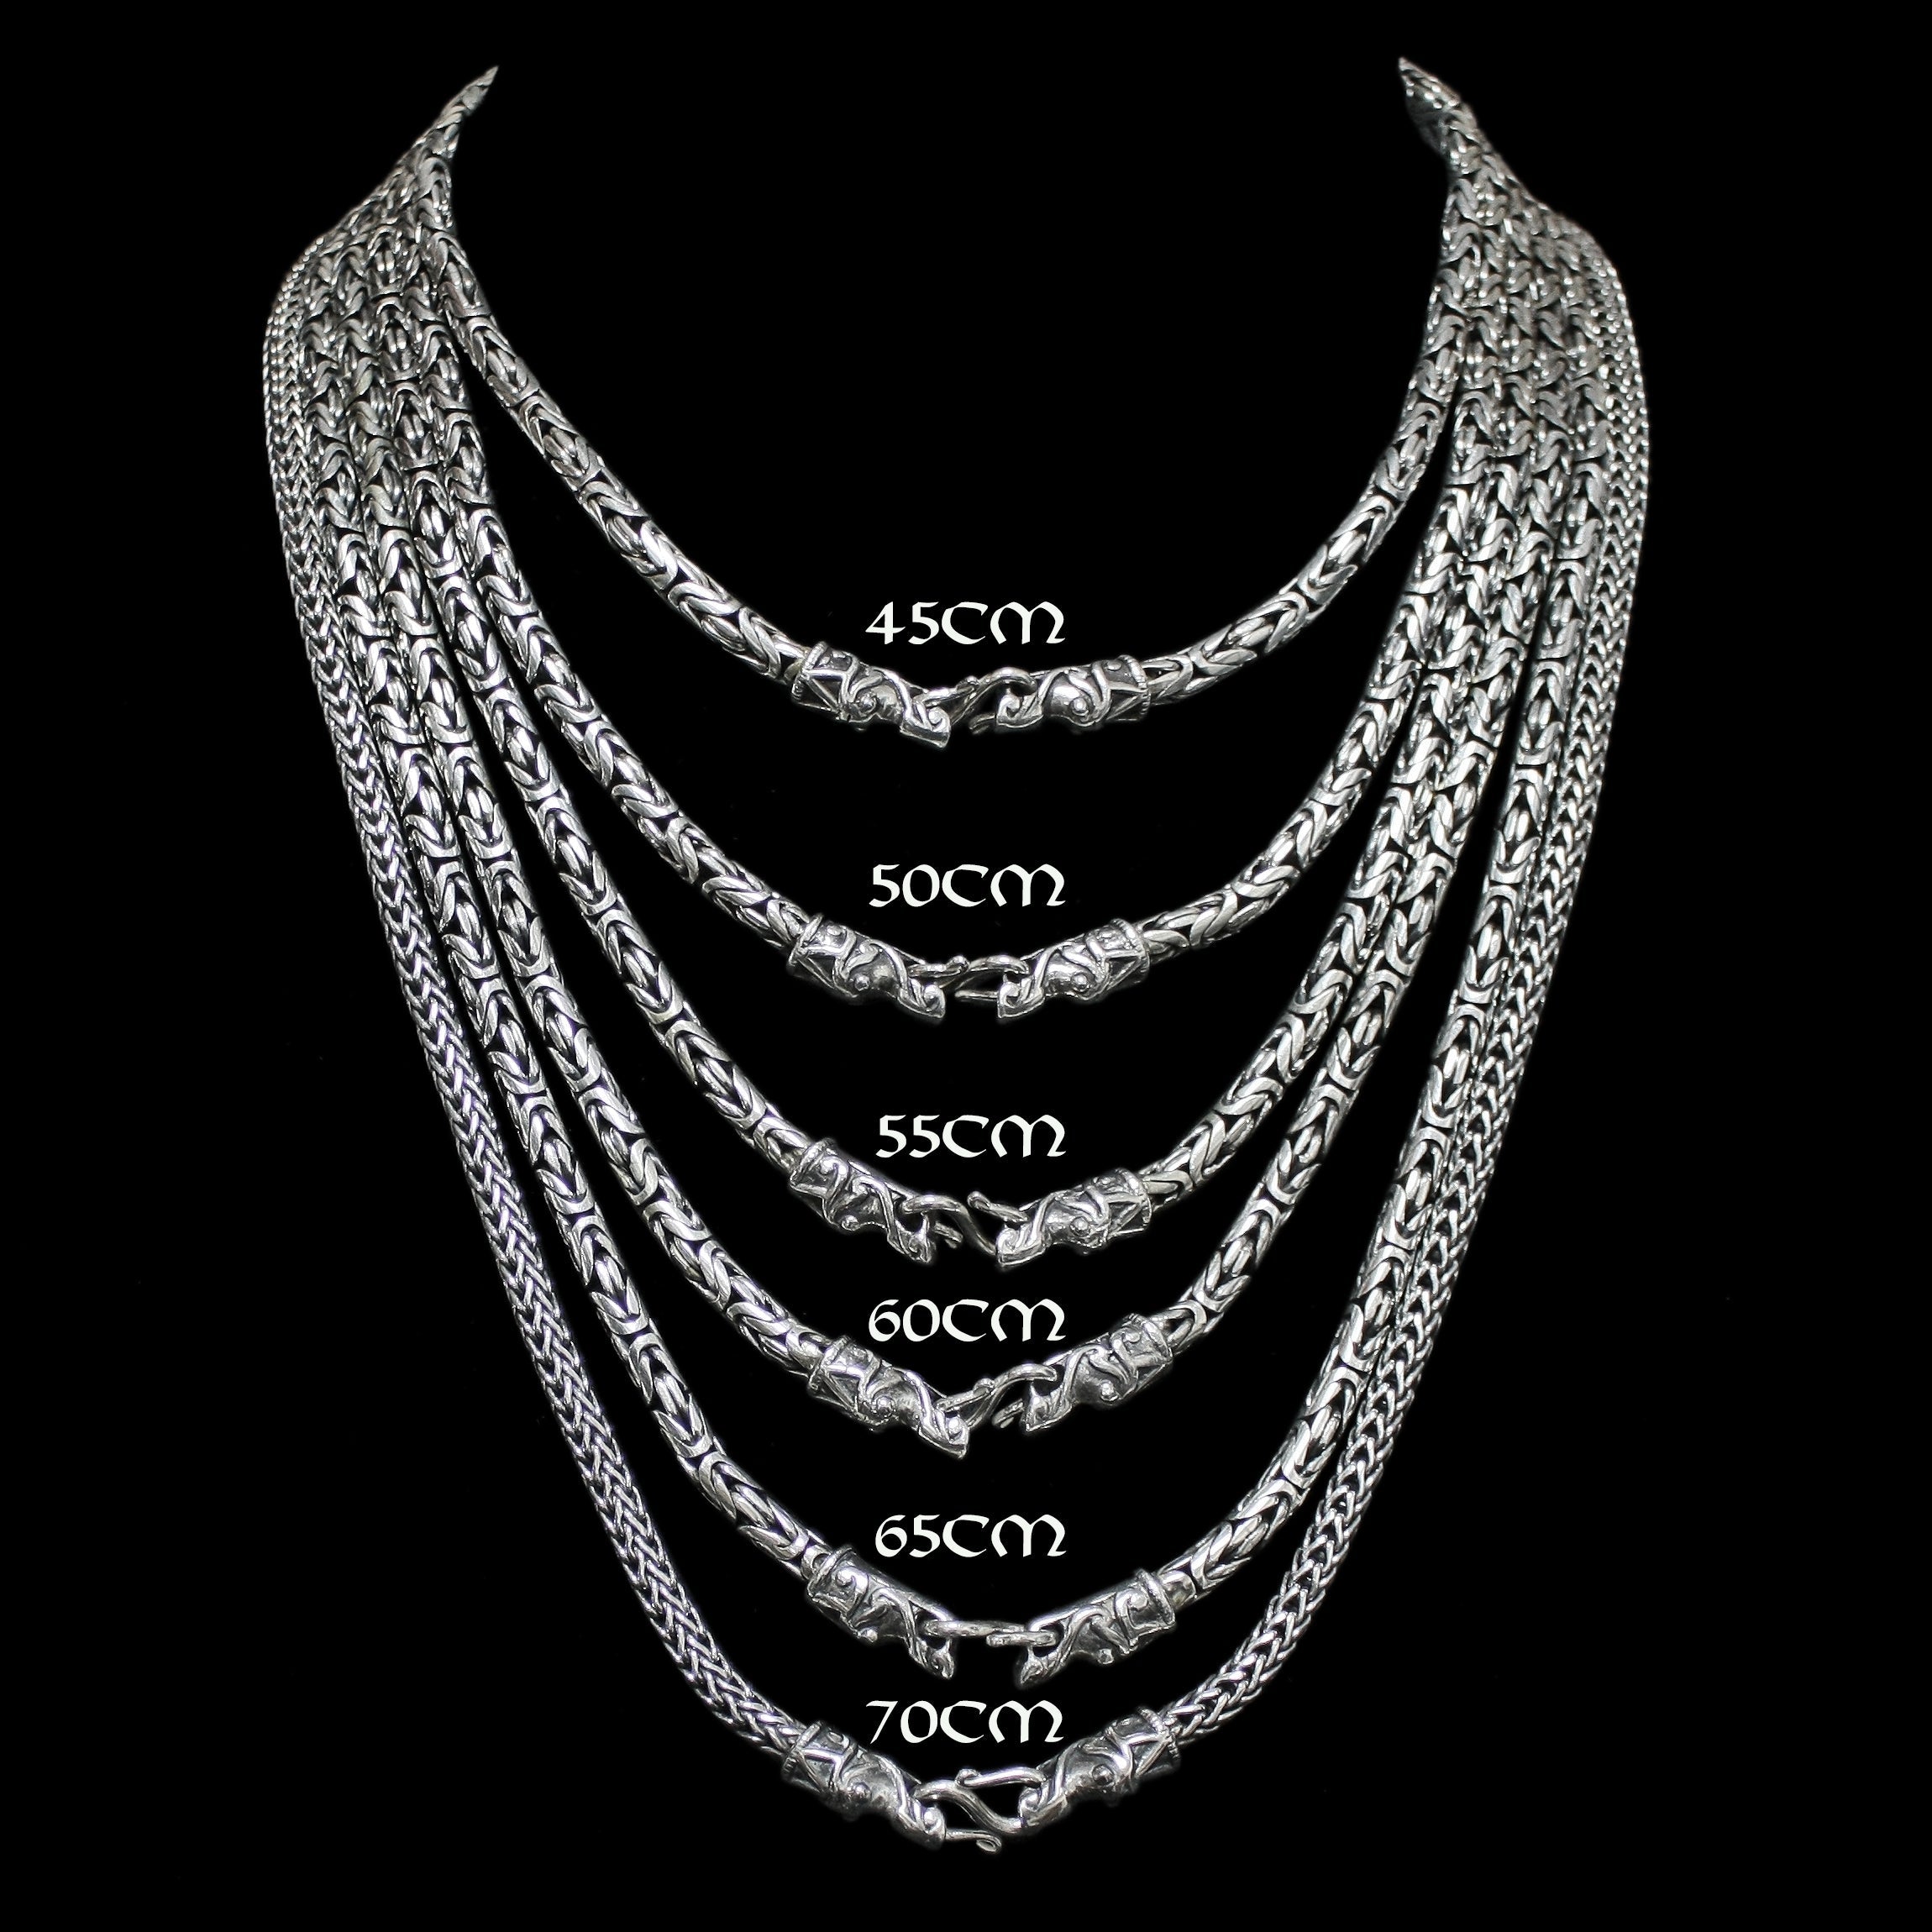 5mm Silver Chain Length Comparisons